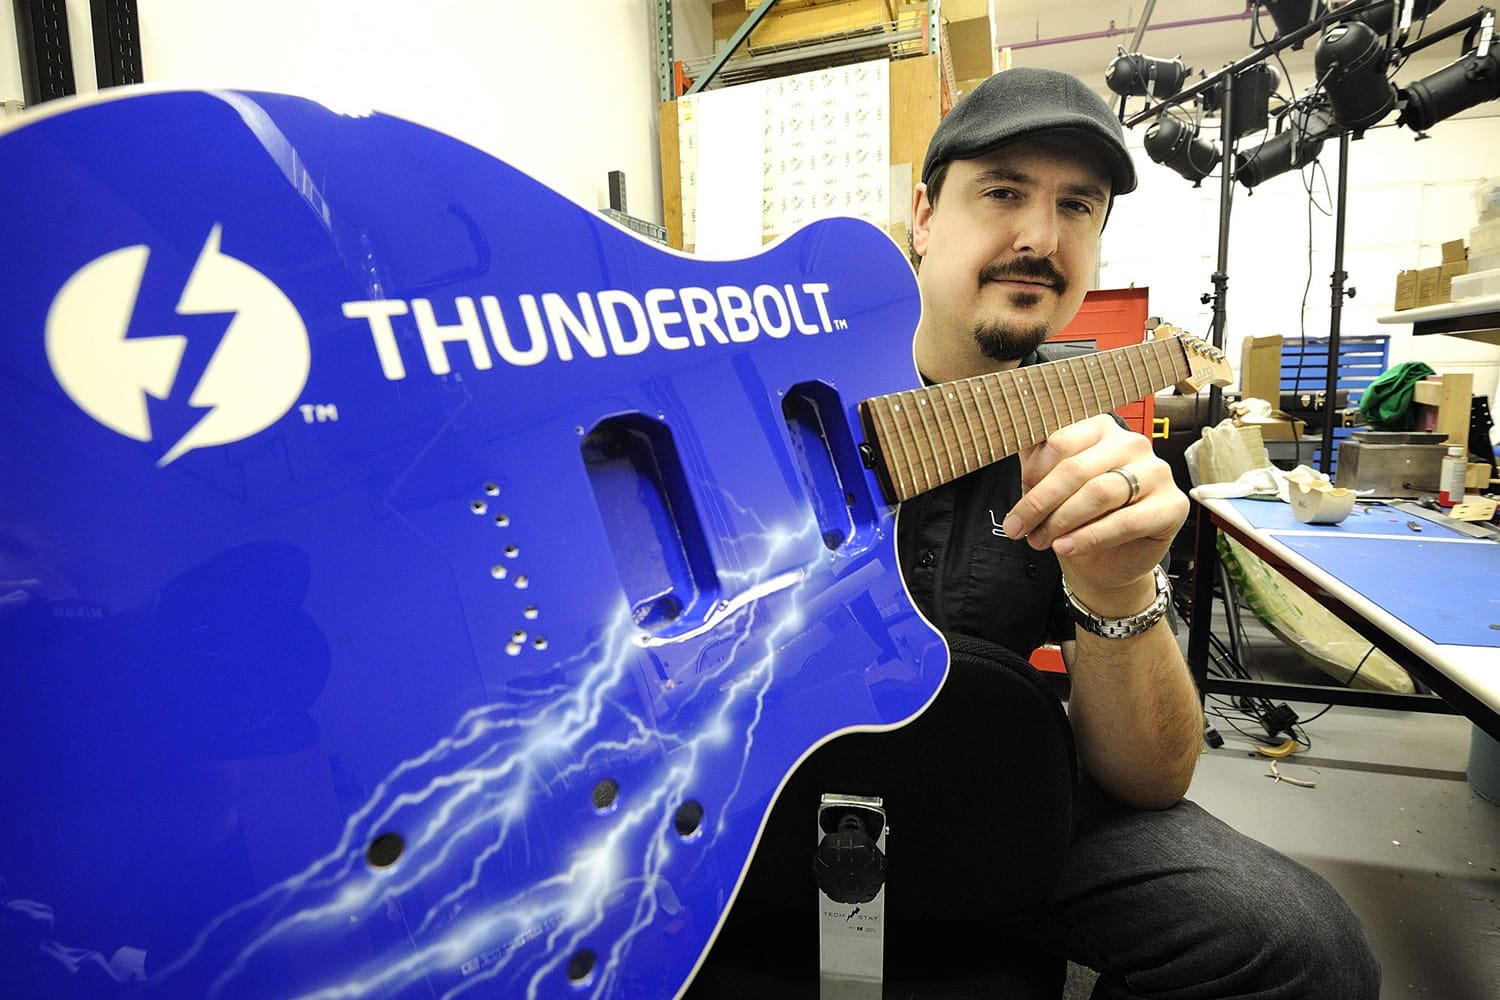 Marcus Young, co-owner and designer with Young Electric Guitars, shows off an instrument commissioned by Intel to showcase the tech firm's latest technology.